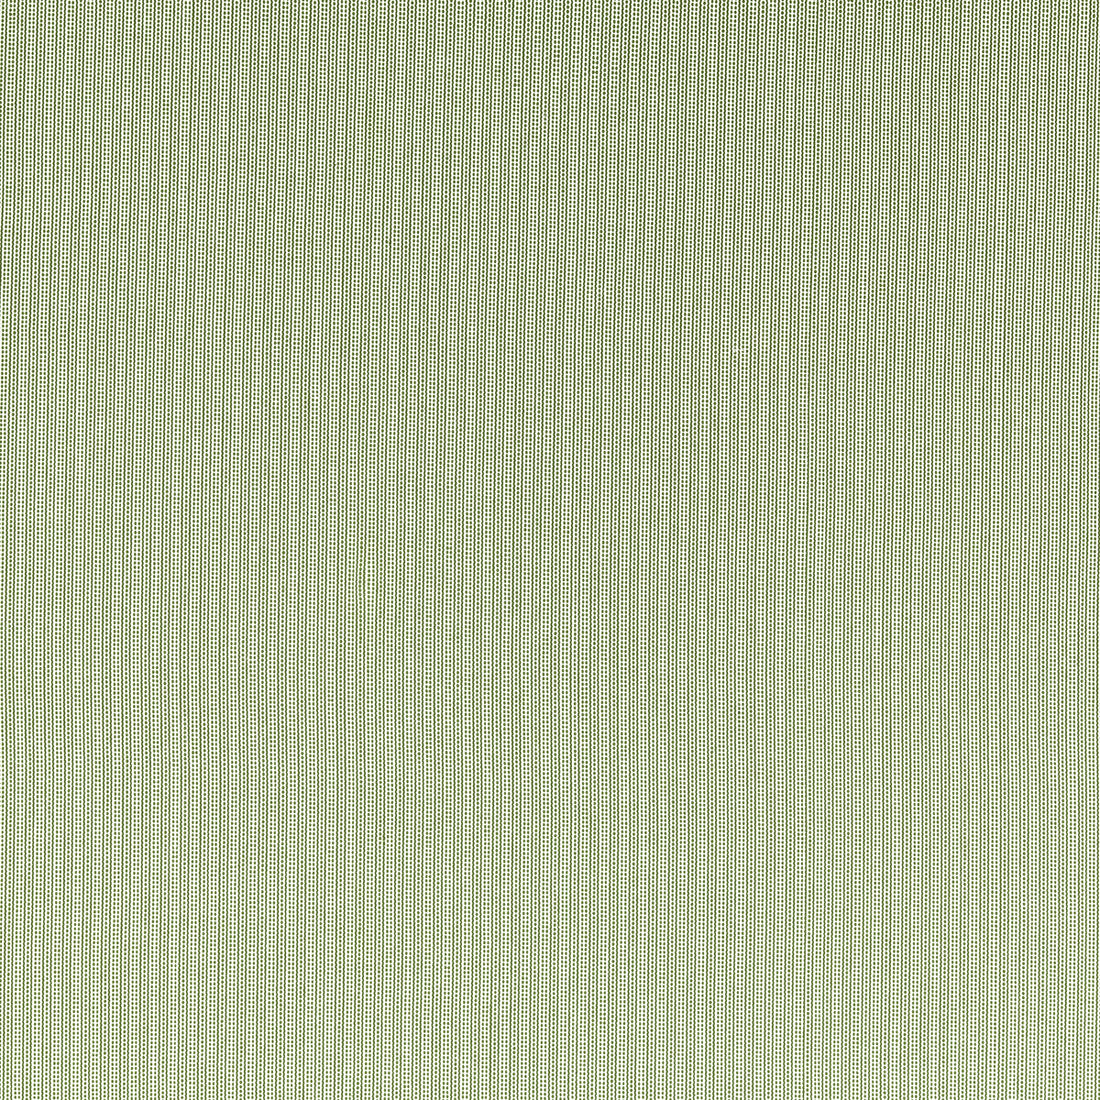 Spencer fabric in sage color - pattern F1504/05.CAC.0 - by Clarke And Clarke in the Clarke &amp; Clarke Edgeworth collection